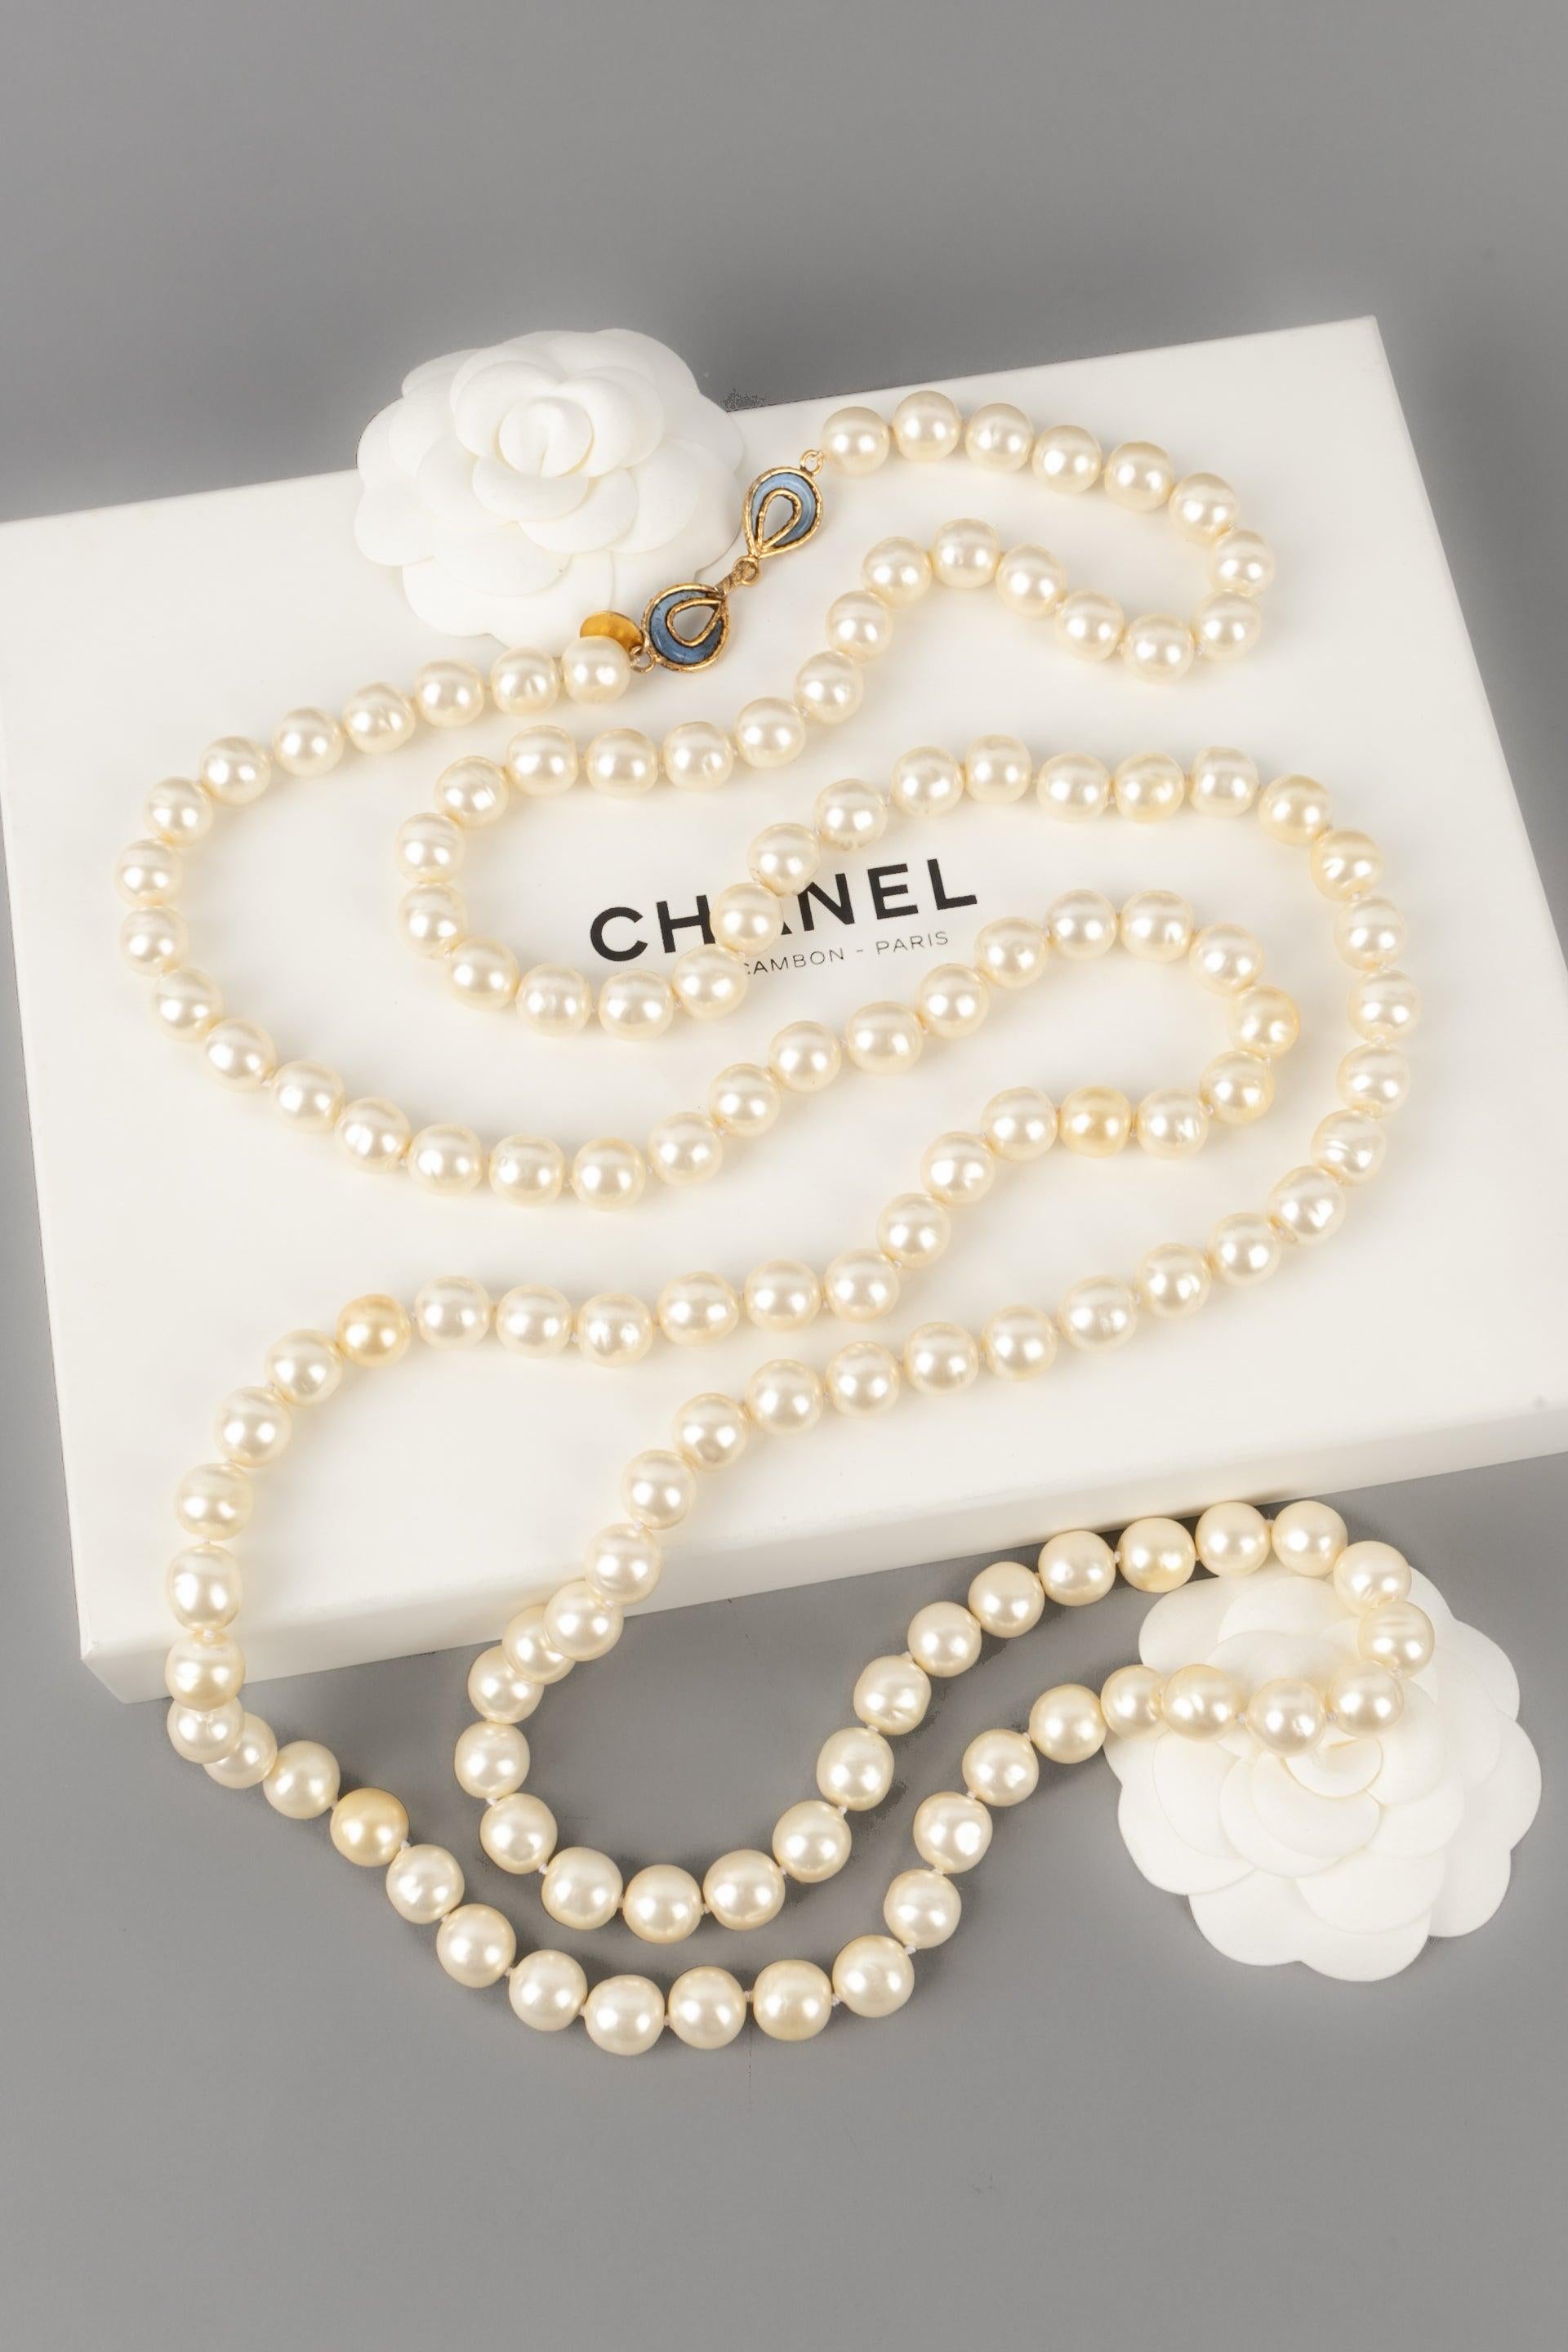 Chanel Necklace / Sautoir with Pearls and Blue Glass For Sale 2